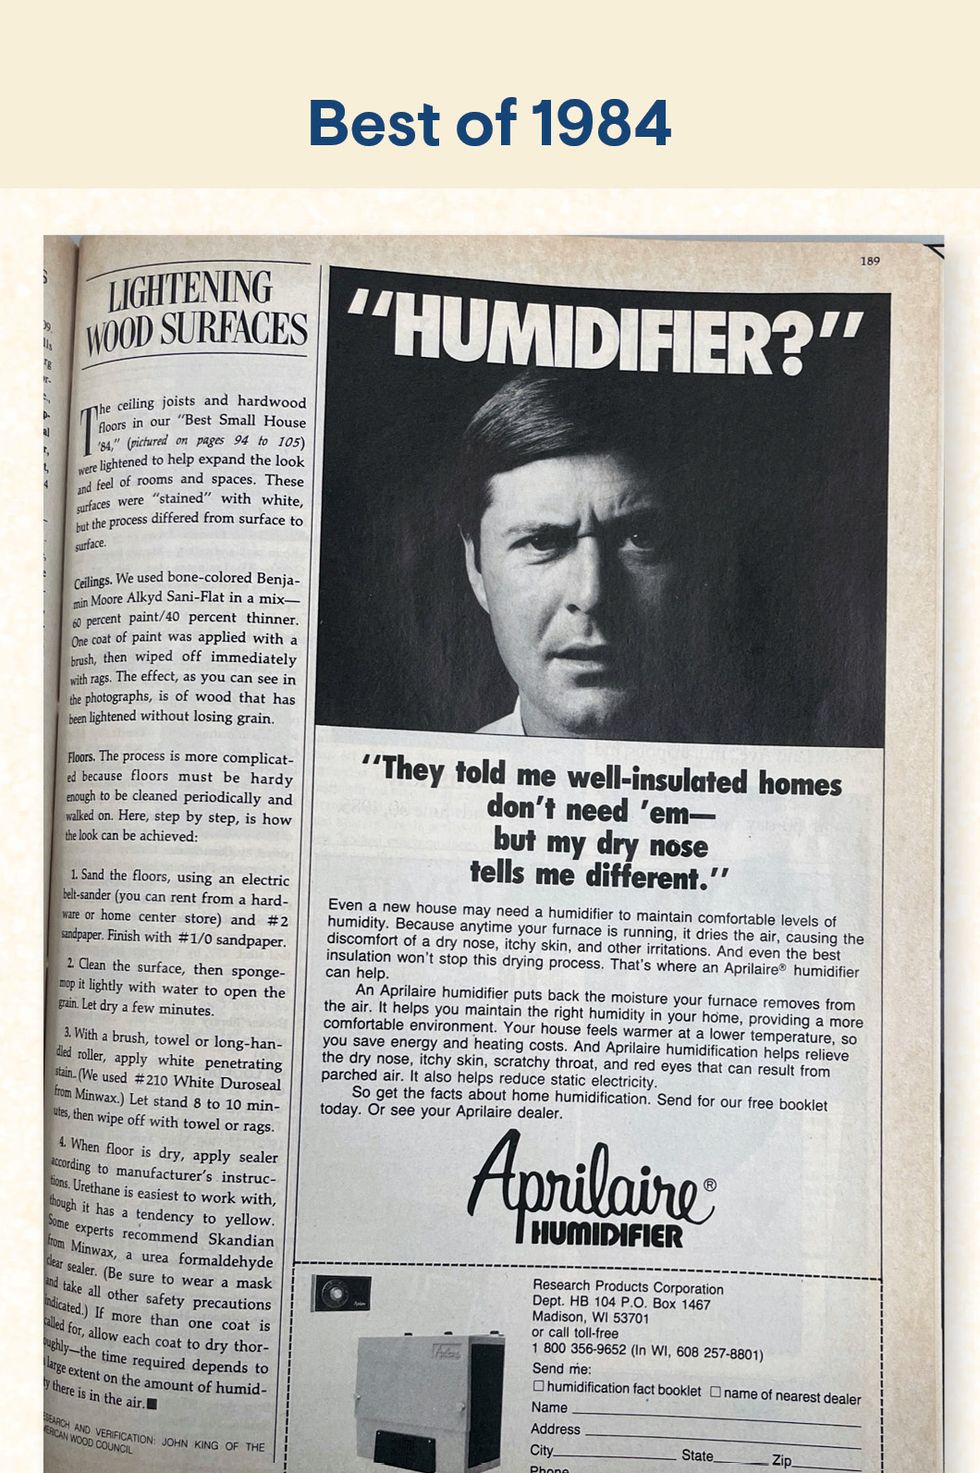 Dear Rich: An Intellectual Property Blog: Are Ads in Old Magazines